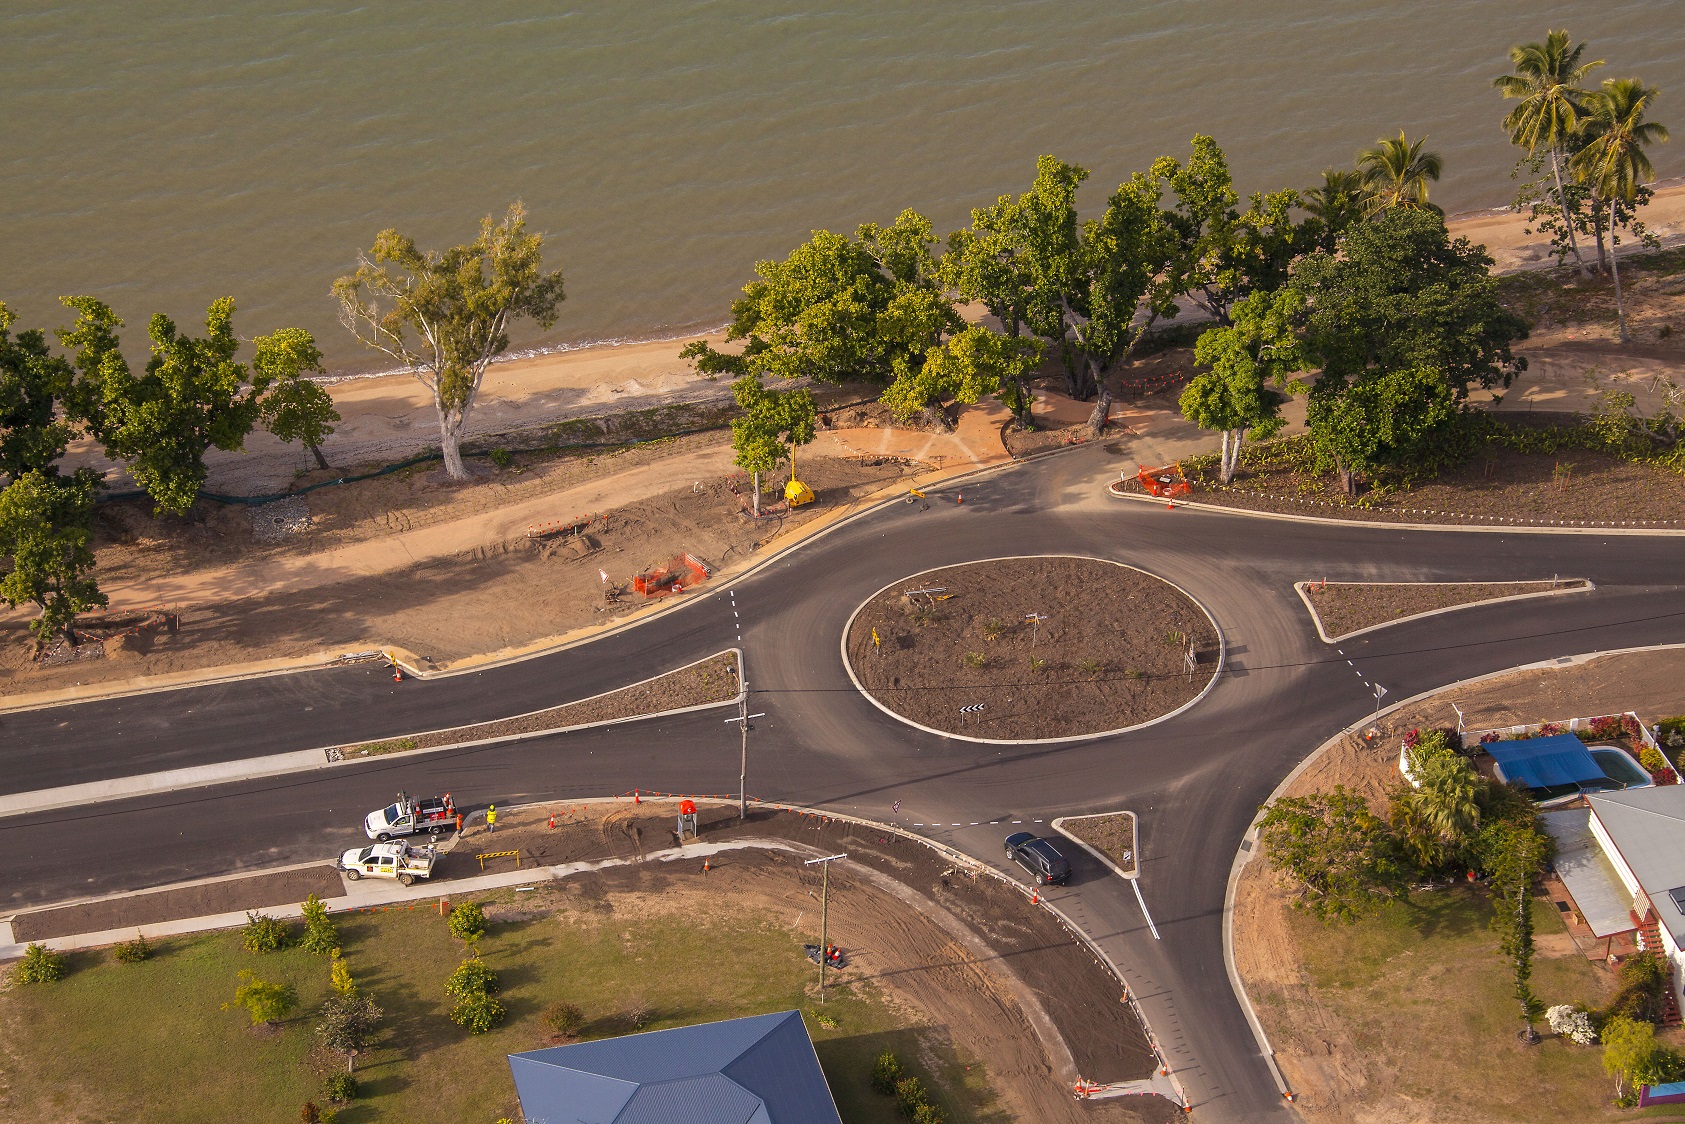 A new roundabout was constructed as part of the project.